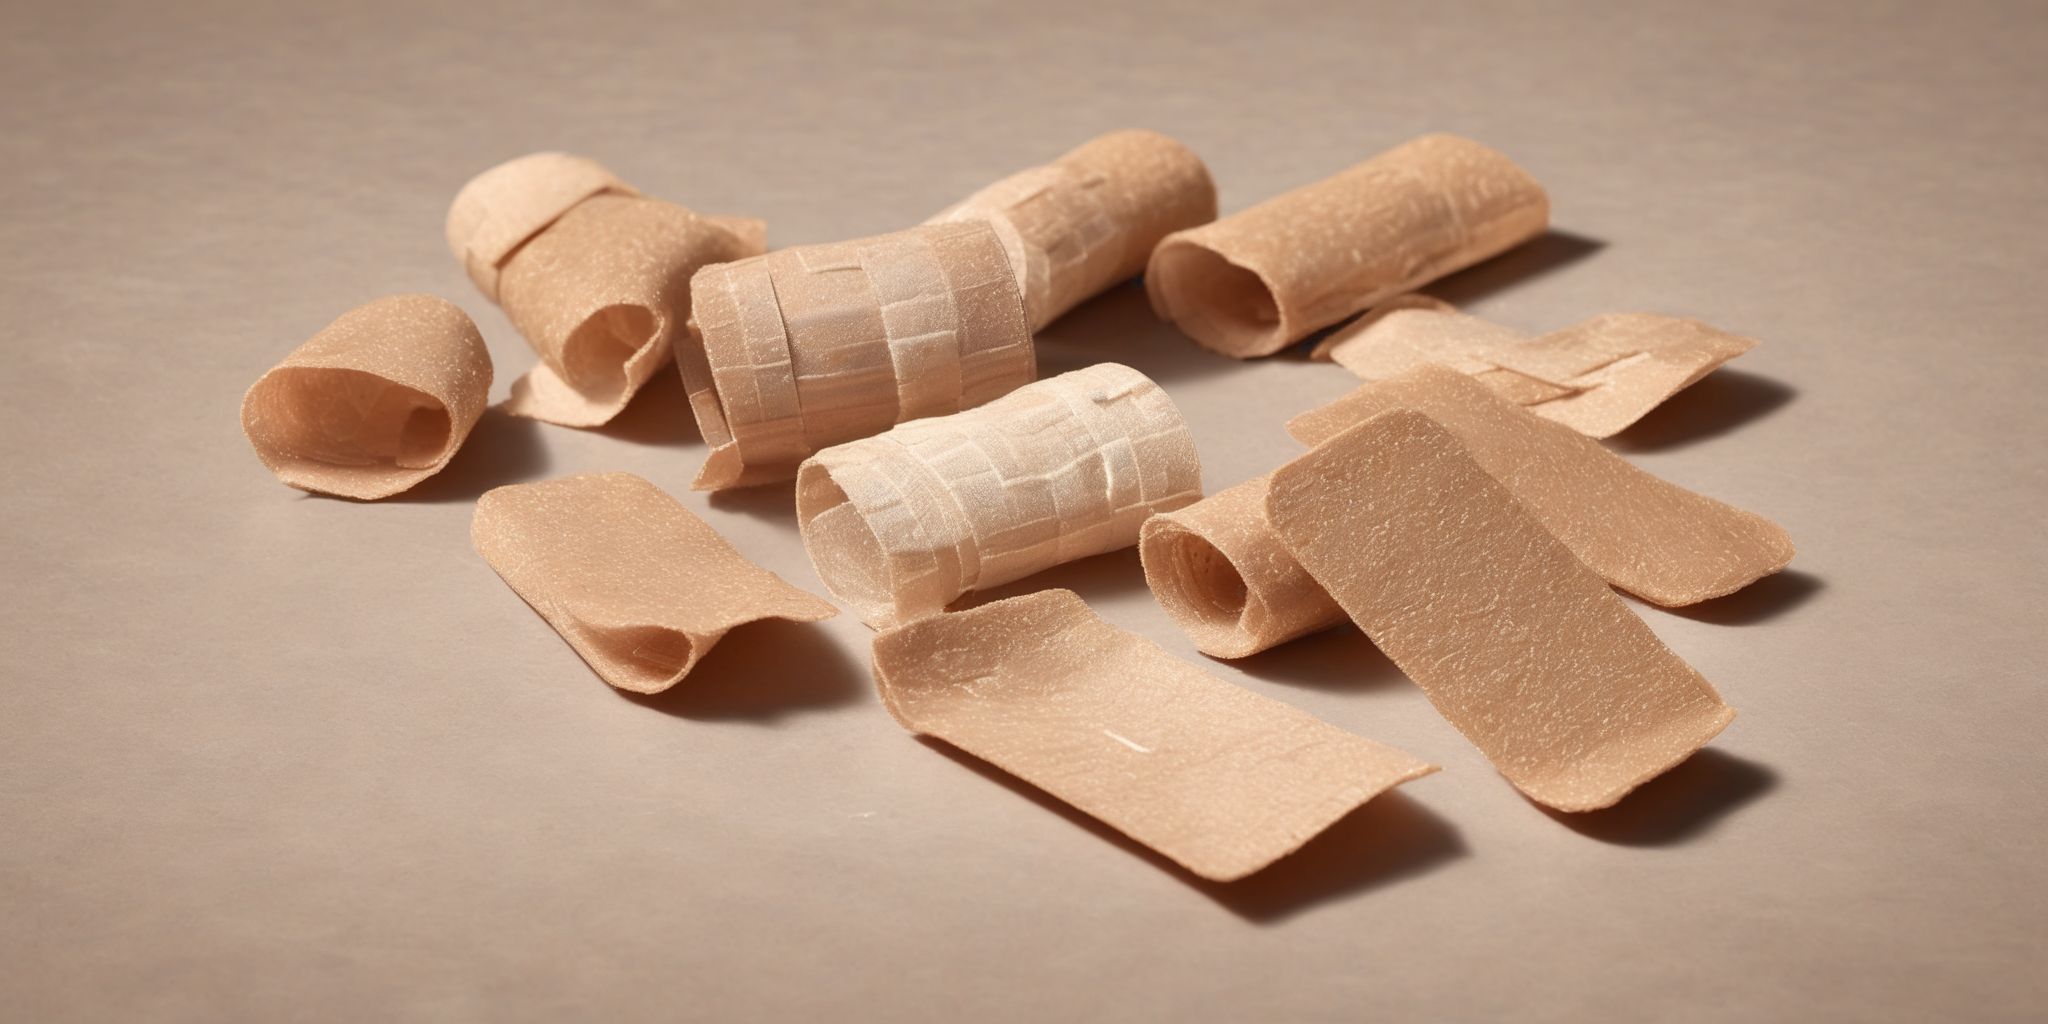 Band-Aid  in realistic, photographic style